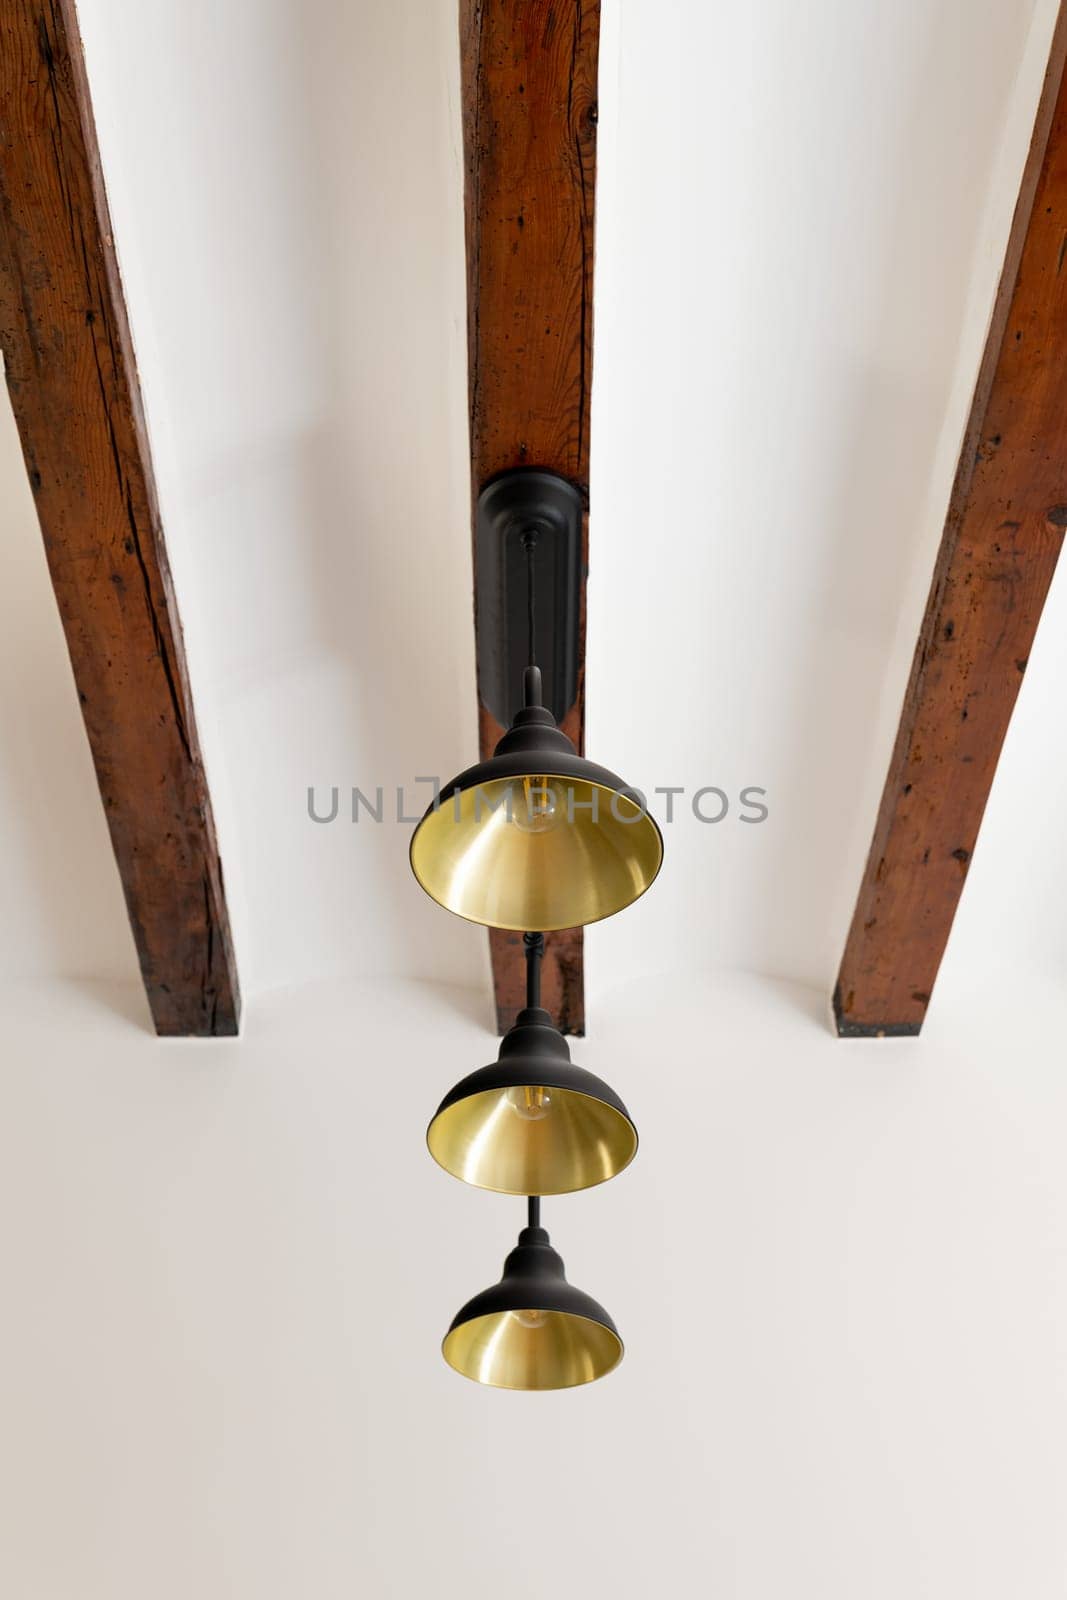 Stylish chandelier with light-bulbs on wooden ceiling beam by apavlin